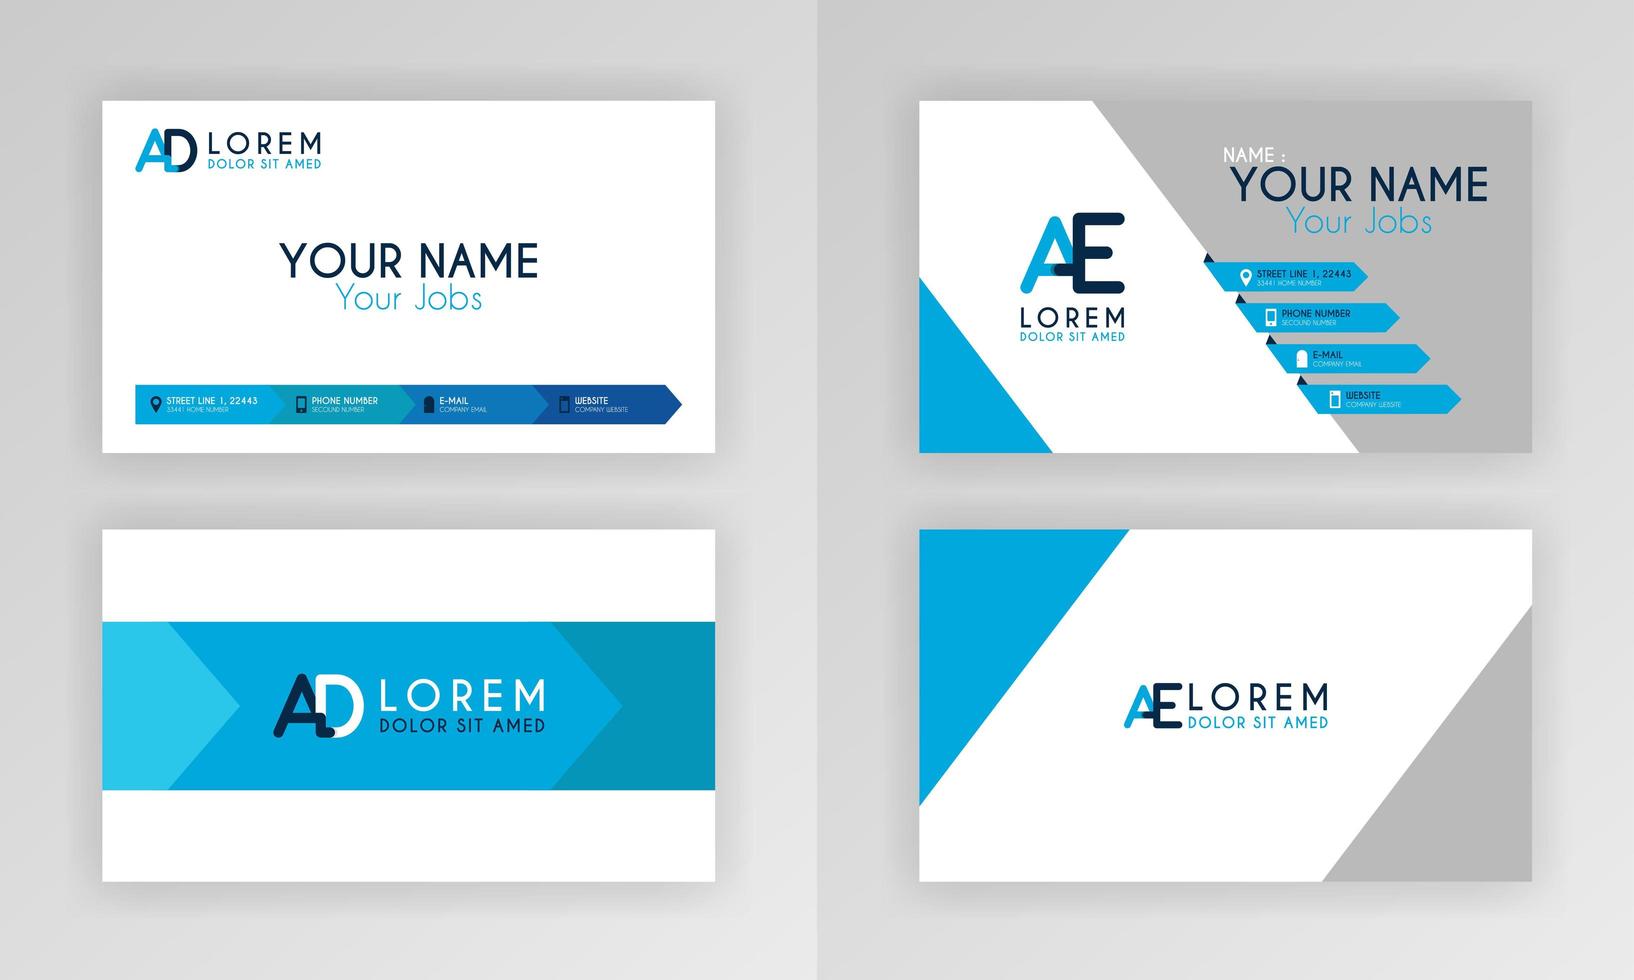 Blue Business Card Template. Simple Identity Card Design With Alphabet Logo And Slash Accent Decoration. For Corporate, Company, Professional, Business, Advertising, Public Relations, Brochure, Poster vector